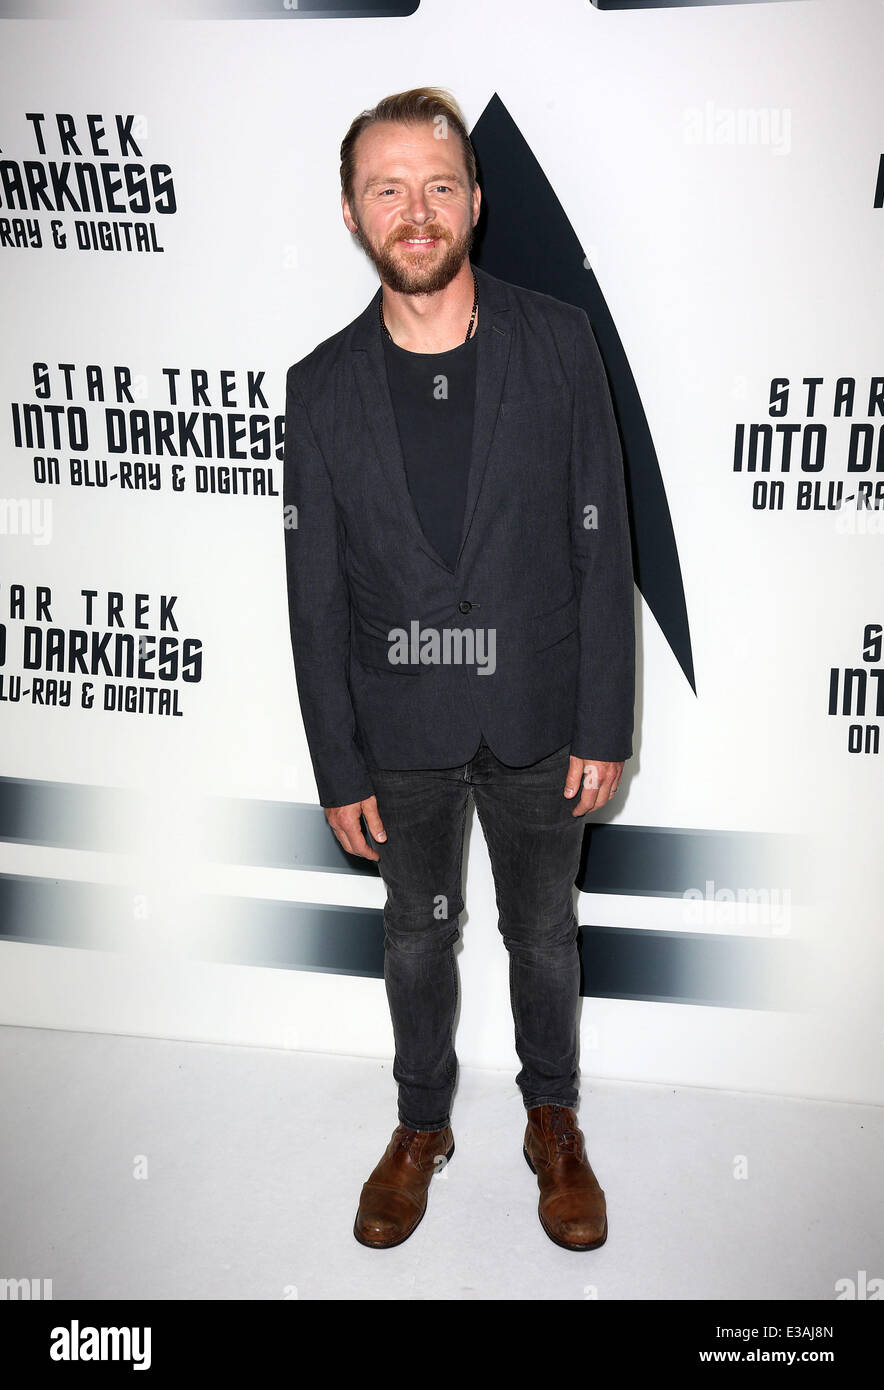 'Star Trek: Into Darkness' Blu-ray and DVD debut at California Science Center  Featuring: Simon Pegg Where: Los Angeles, Califor Stock Photo